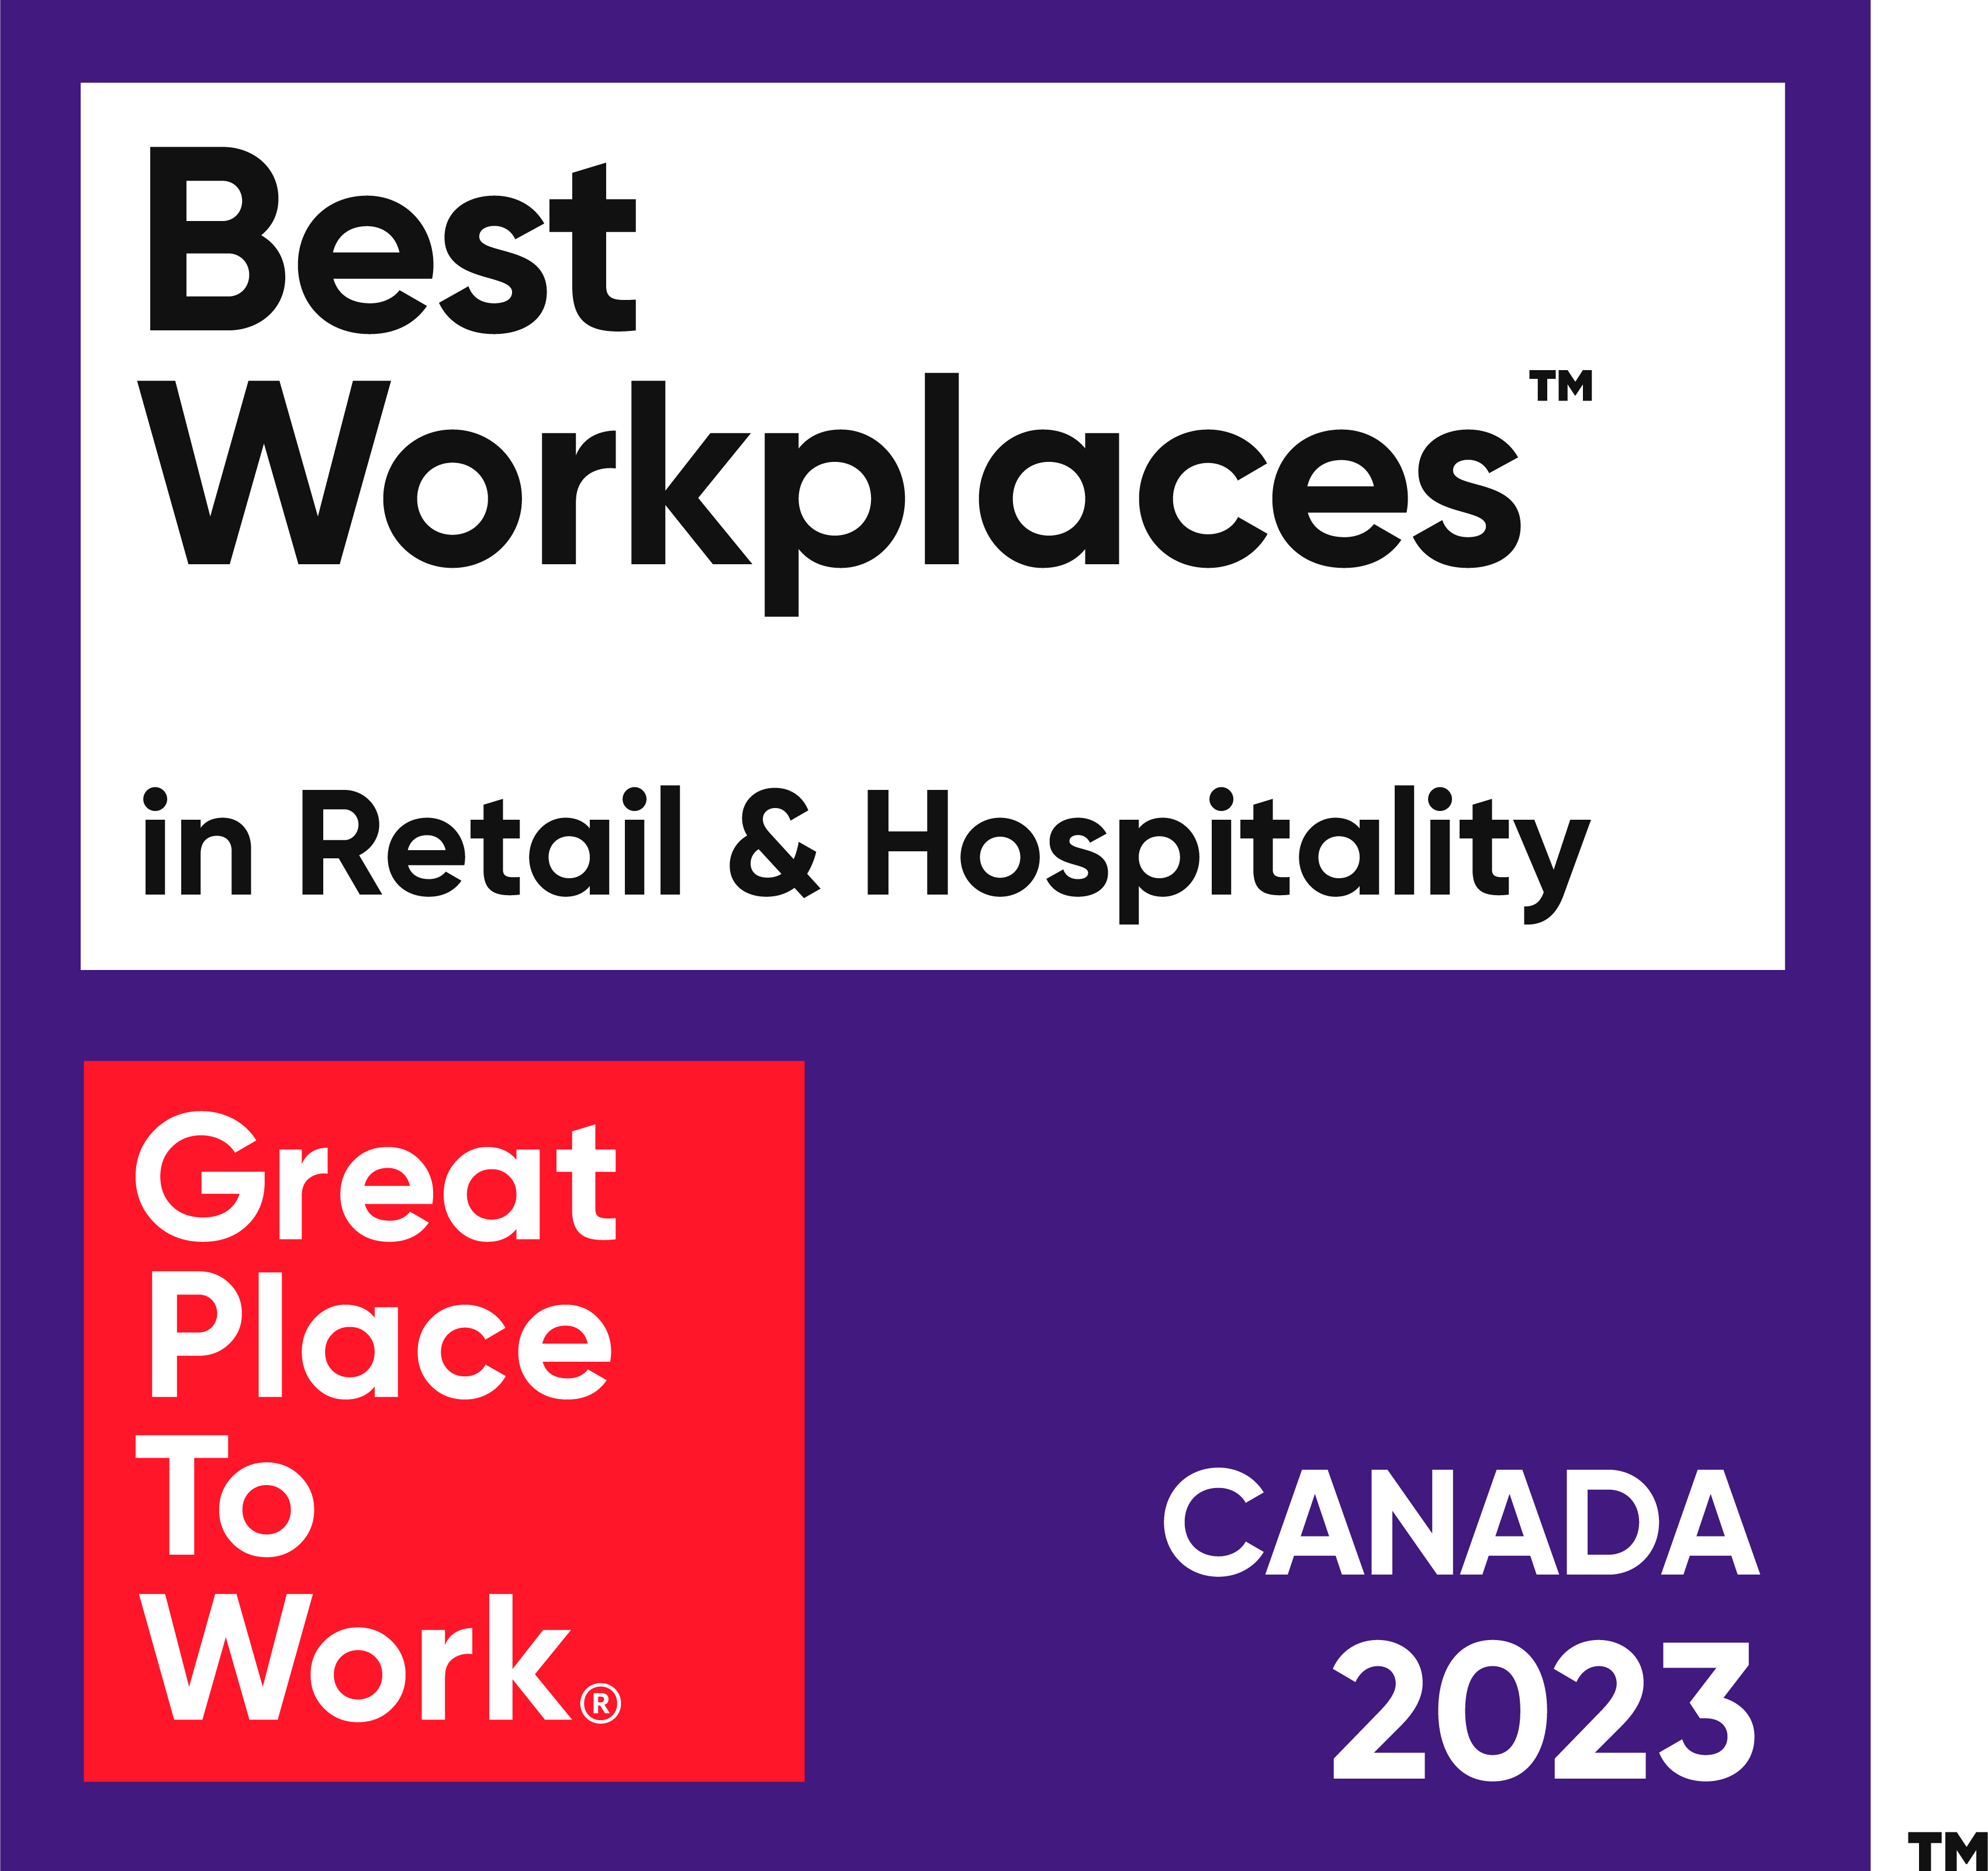 Best Workplaces in Retail & Hospitality Great Place To Work CANADA 2023